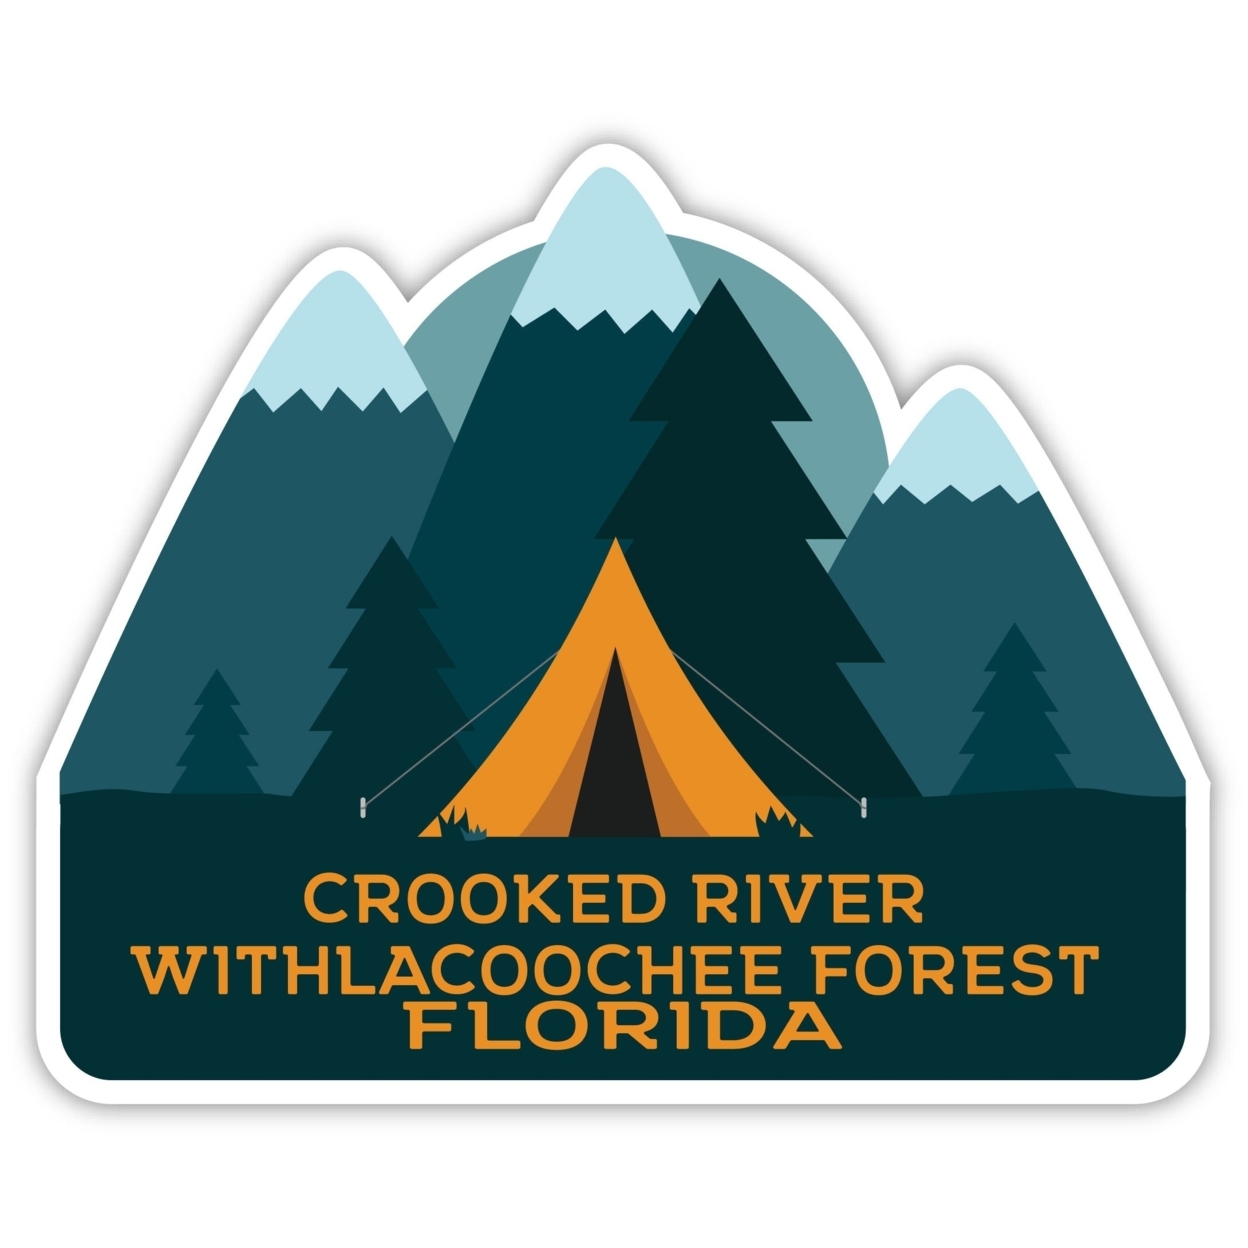 Crooked River Withlacoochee Forest Florida Souvenir Decorative Stickers (Choose Theme And Size) - 4-Pack, 6-Inch, Tent